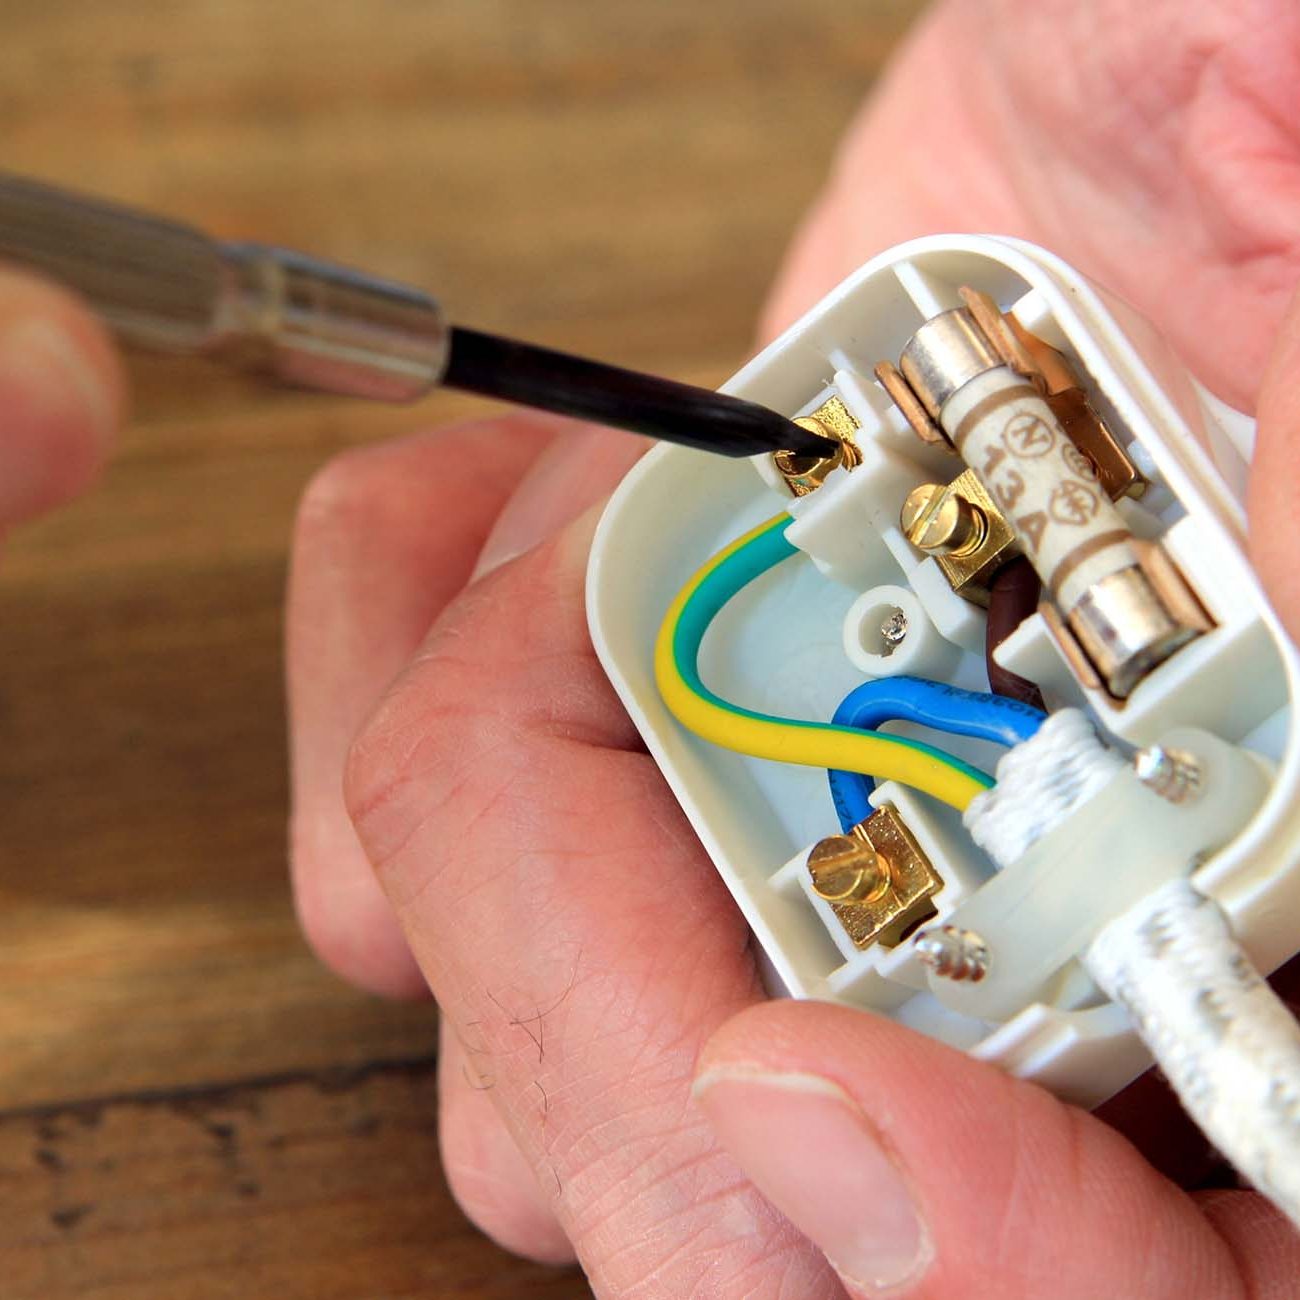 Replacing a fuse in a UK plug